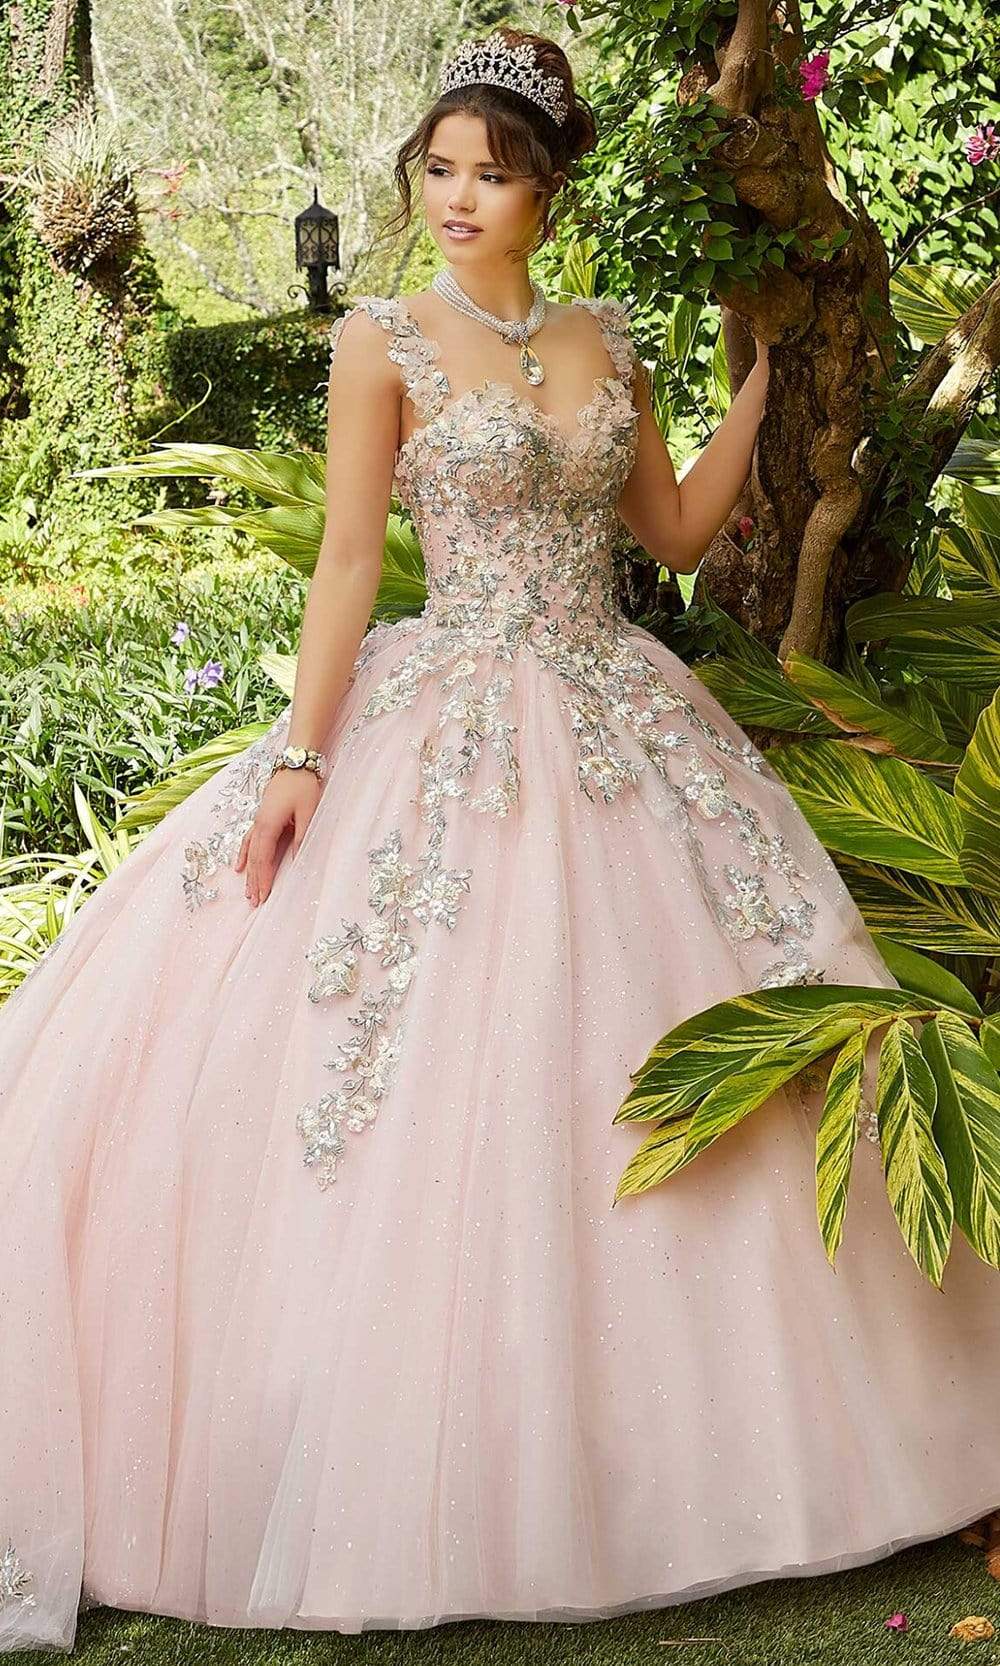 Vizcaya by Mori Lee - 60123 Floral Embroidered Ombre Ballgown Quinceanera Dresses